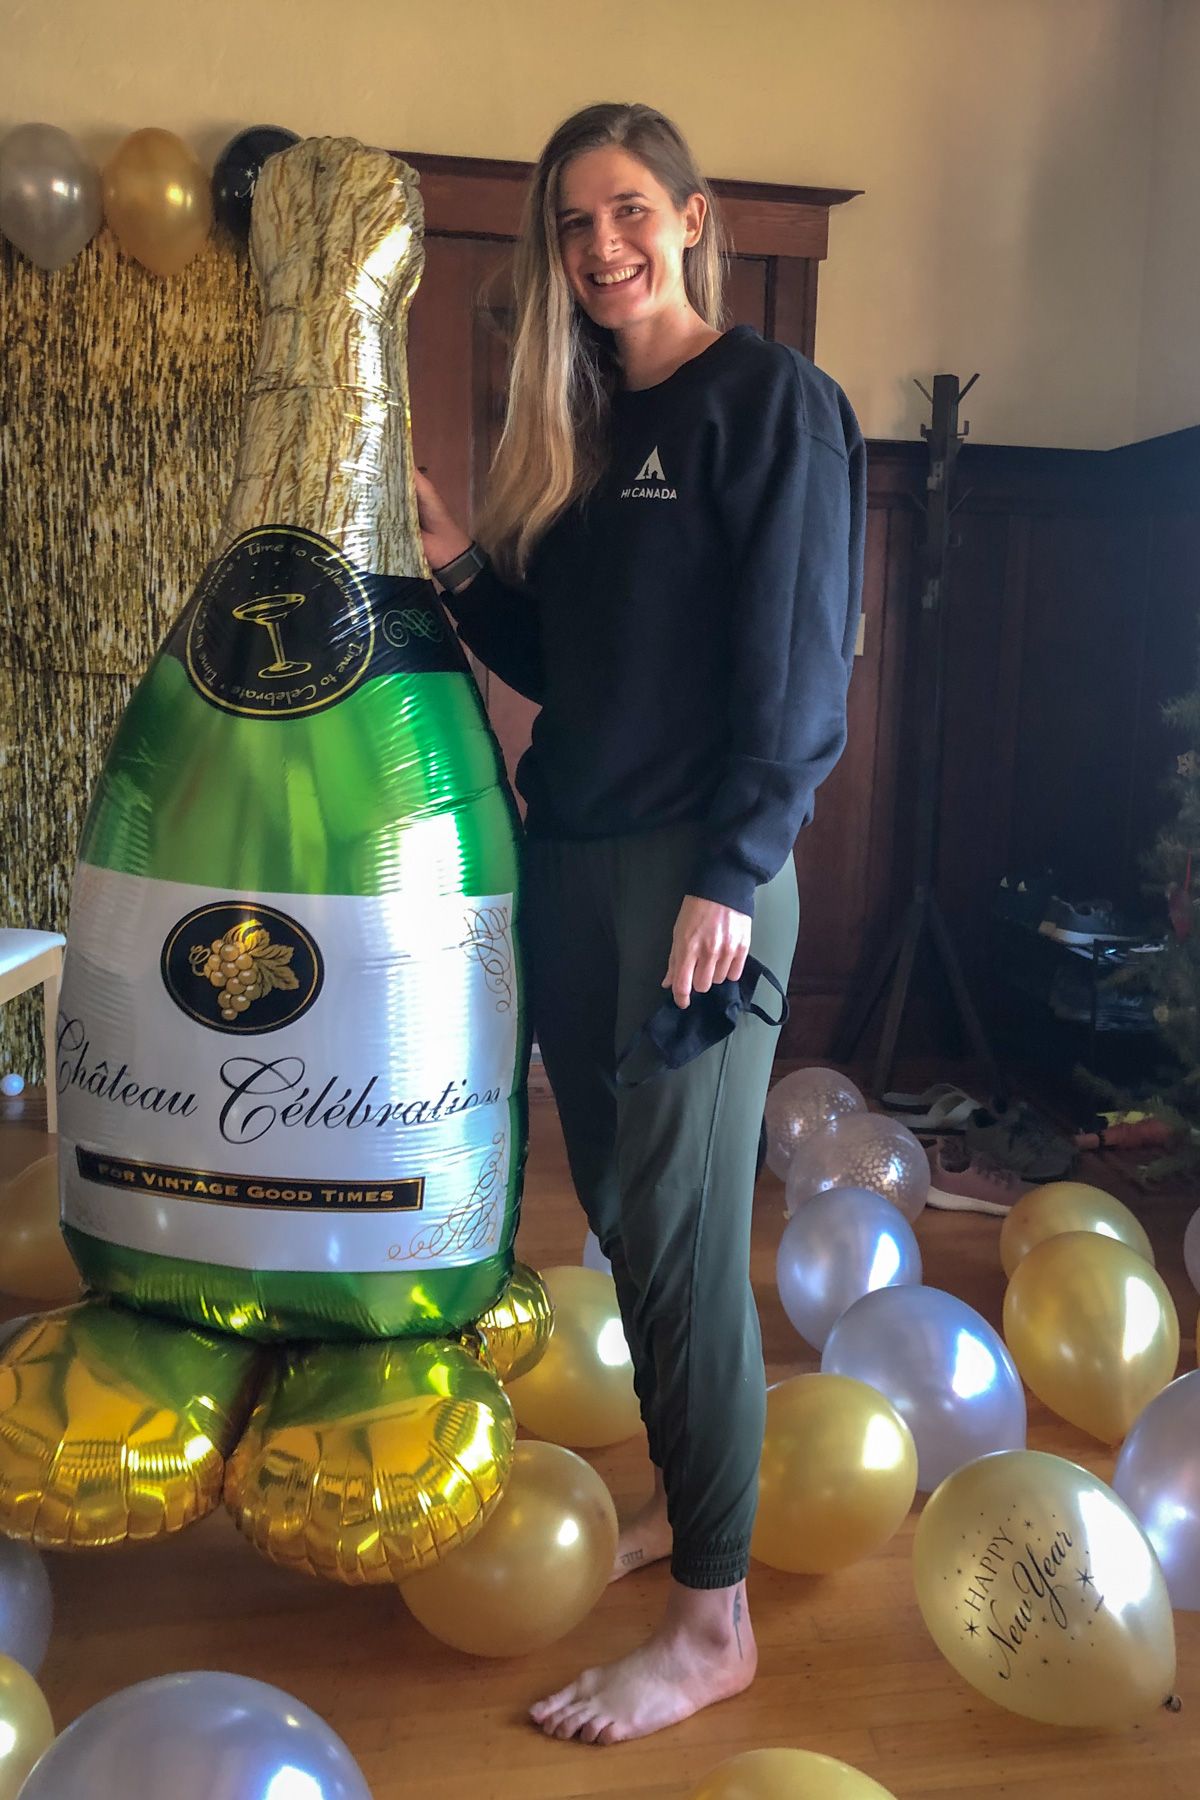 A woman wearing green joggers and a dark sweatshirt smiles at the camera in a living room, standing next to a giant balloon shaped like a champagne bottle.